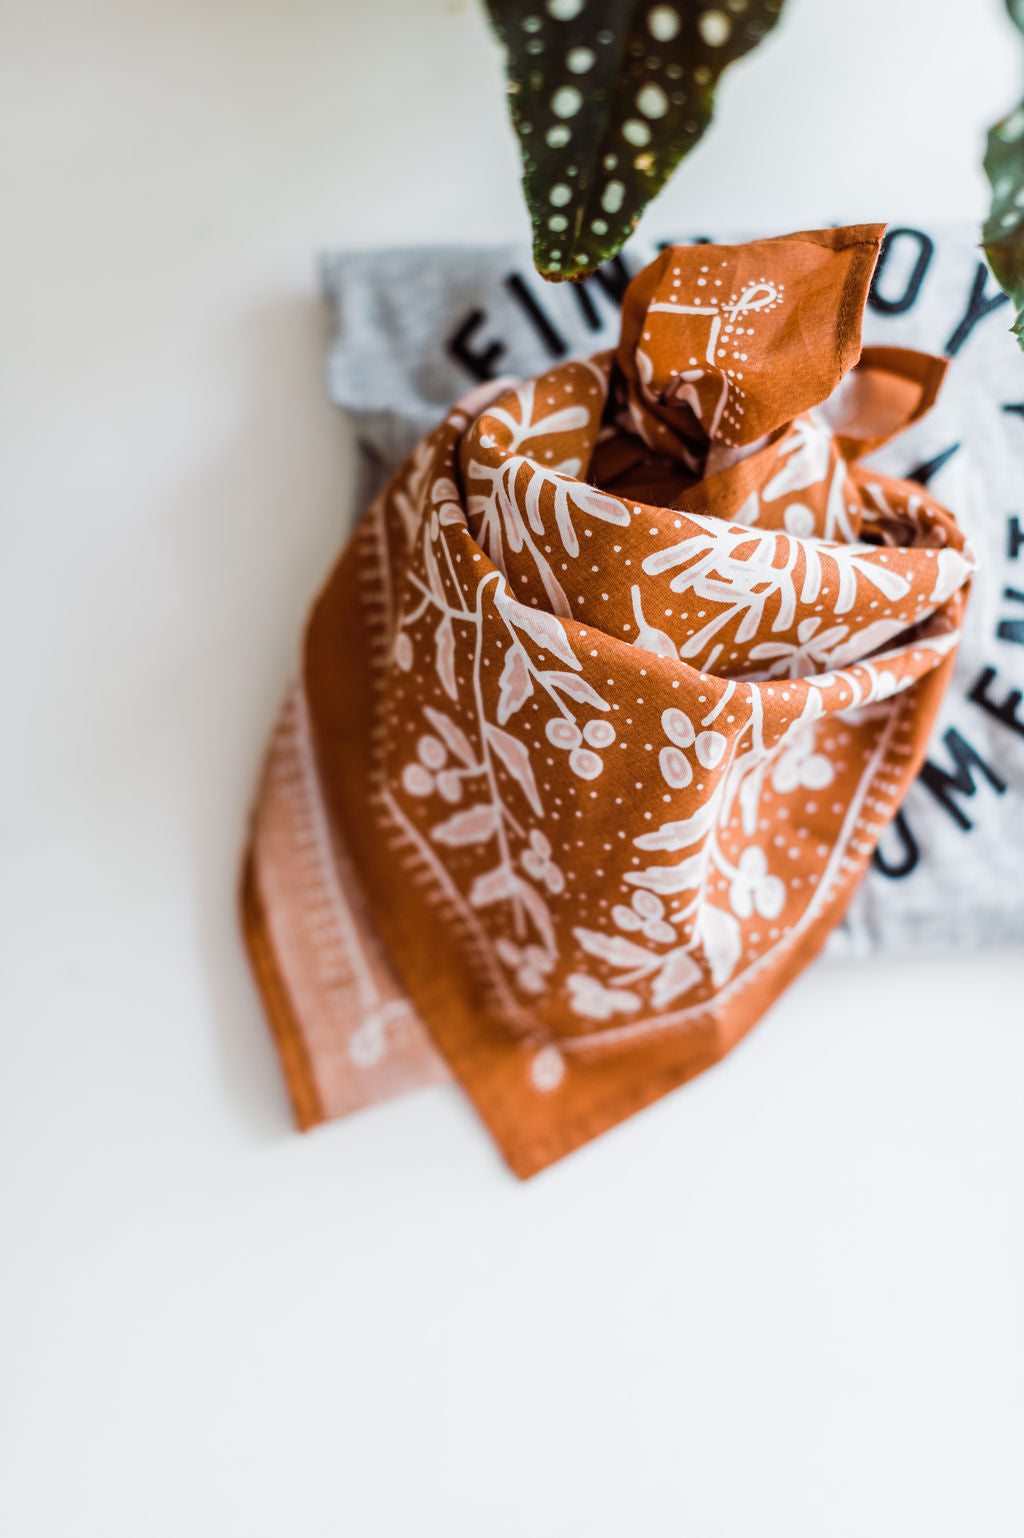 Copper bandana with light pink flowers design by Hemlock Goods | you can shop now at  shop.rambleandcompany.com or visit our storefront in downtown Wichita Falls, Texas || small batch + hand printed tees | home goods | paper goods | gifts + more